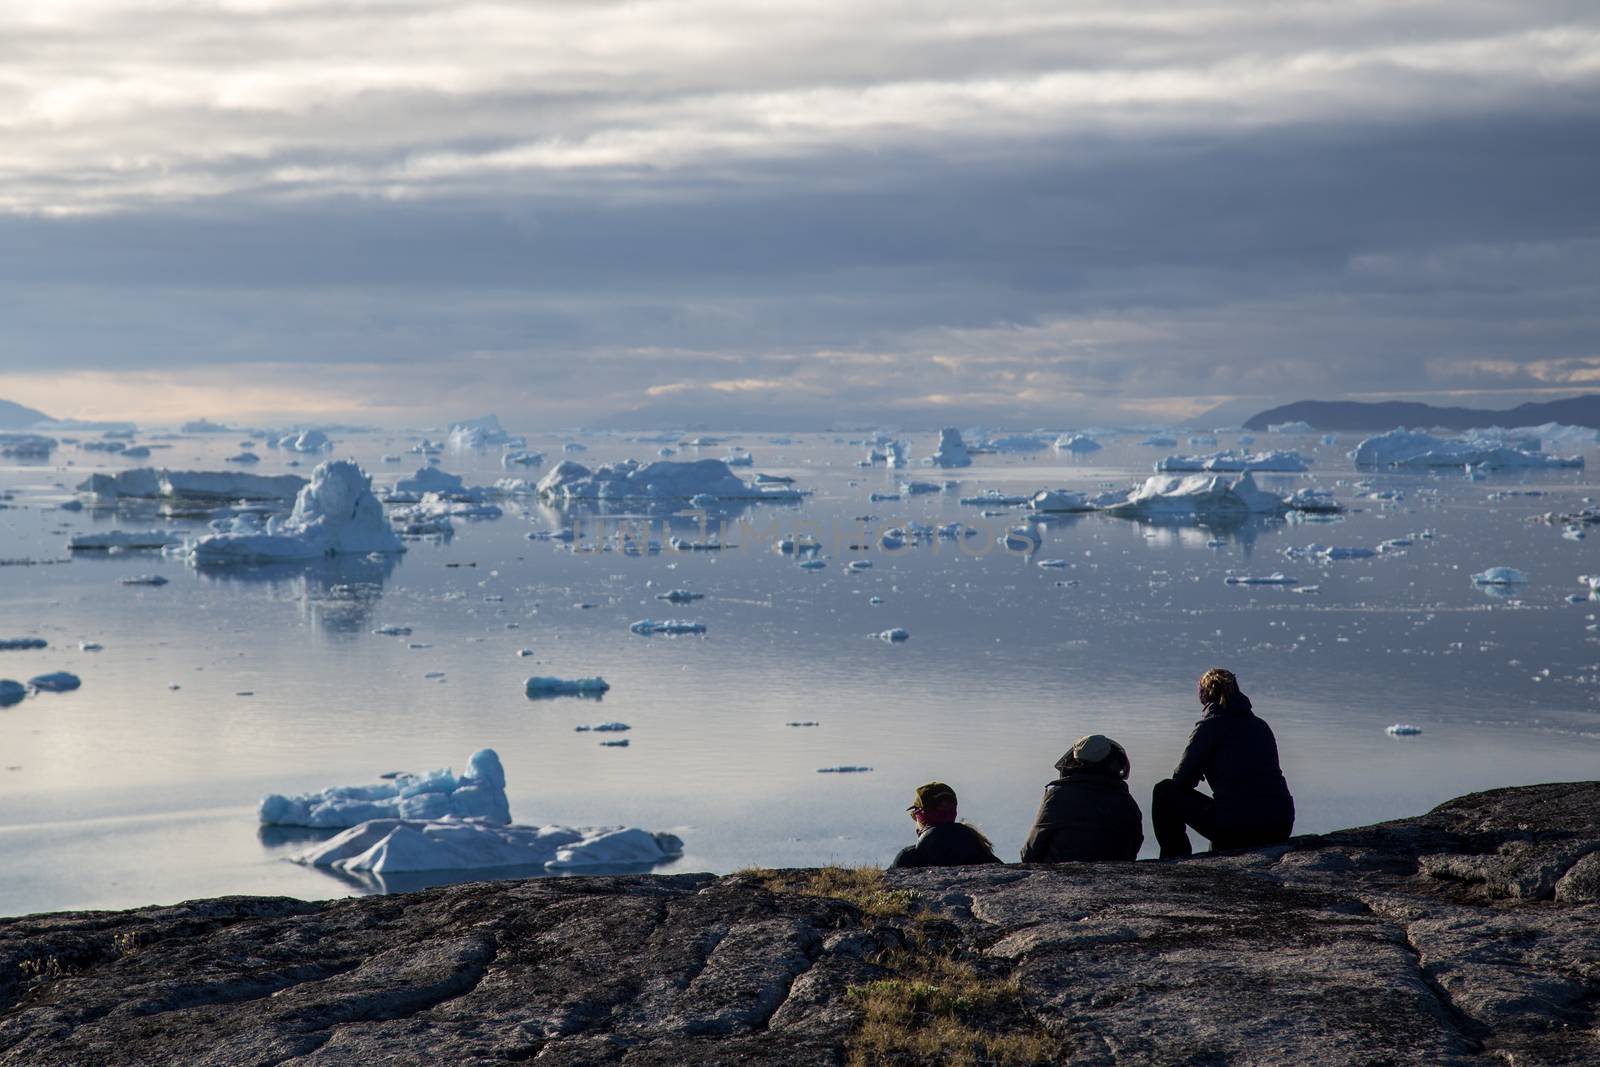 Group of people looking at icebergs in Rodebay, Greenland by oliverfoerstner